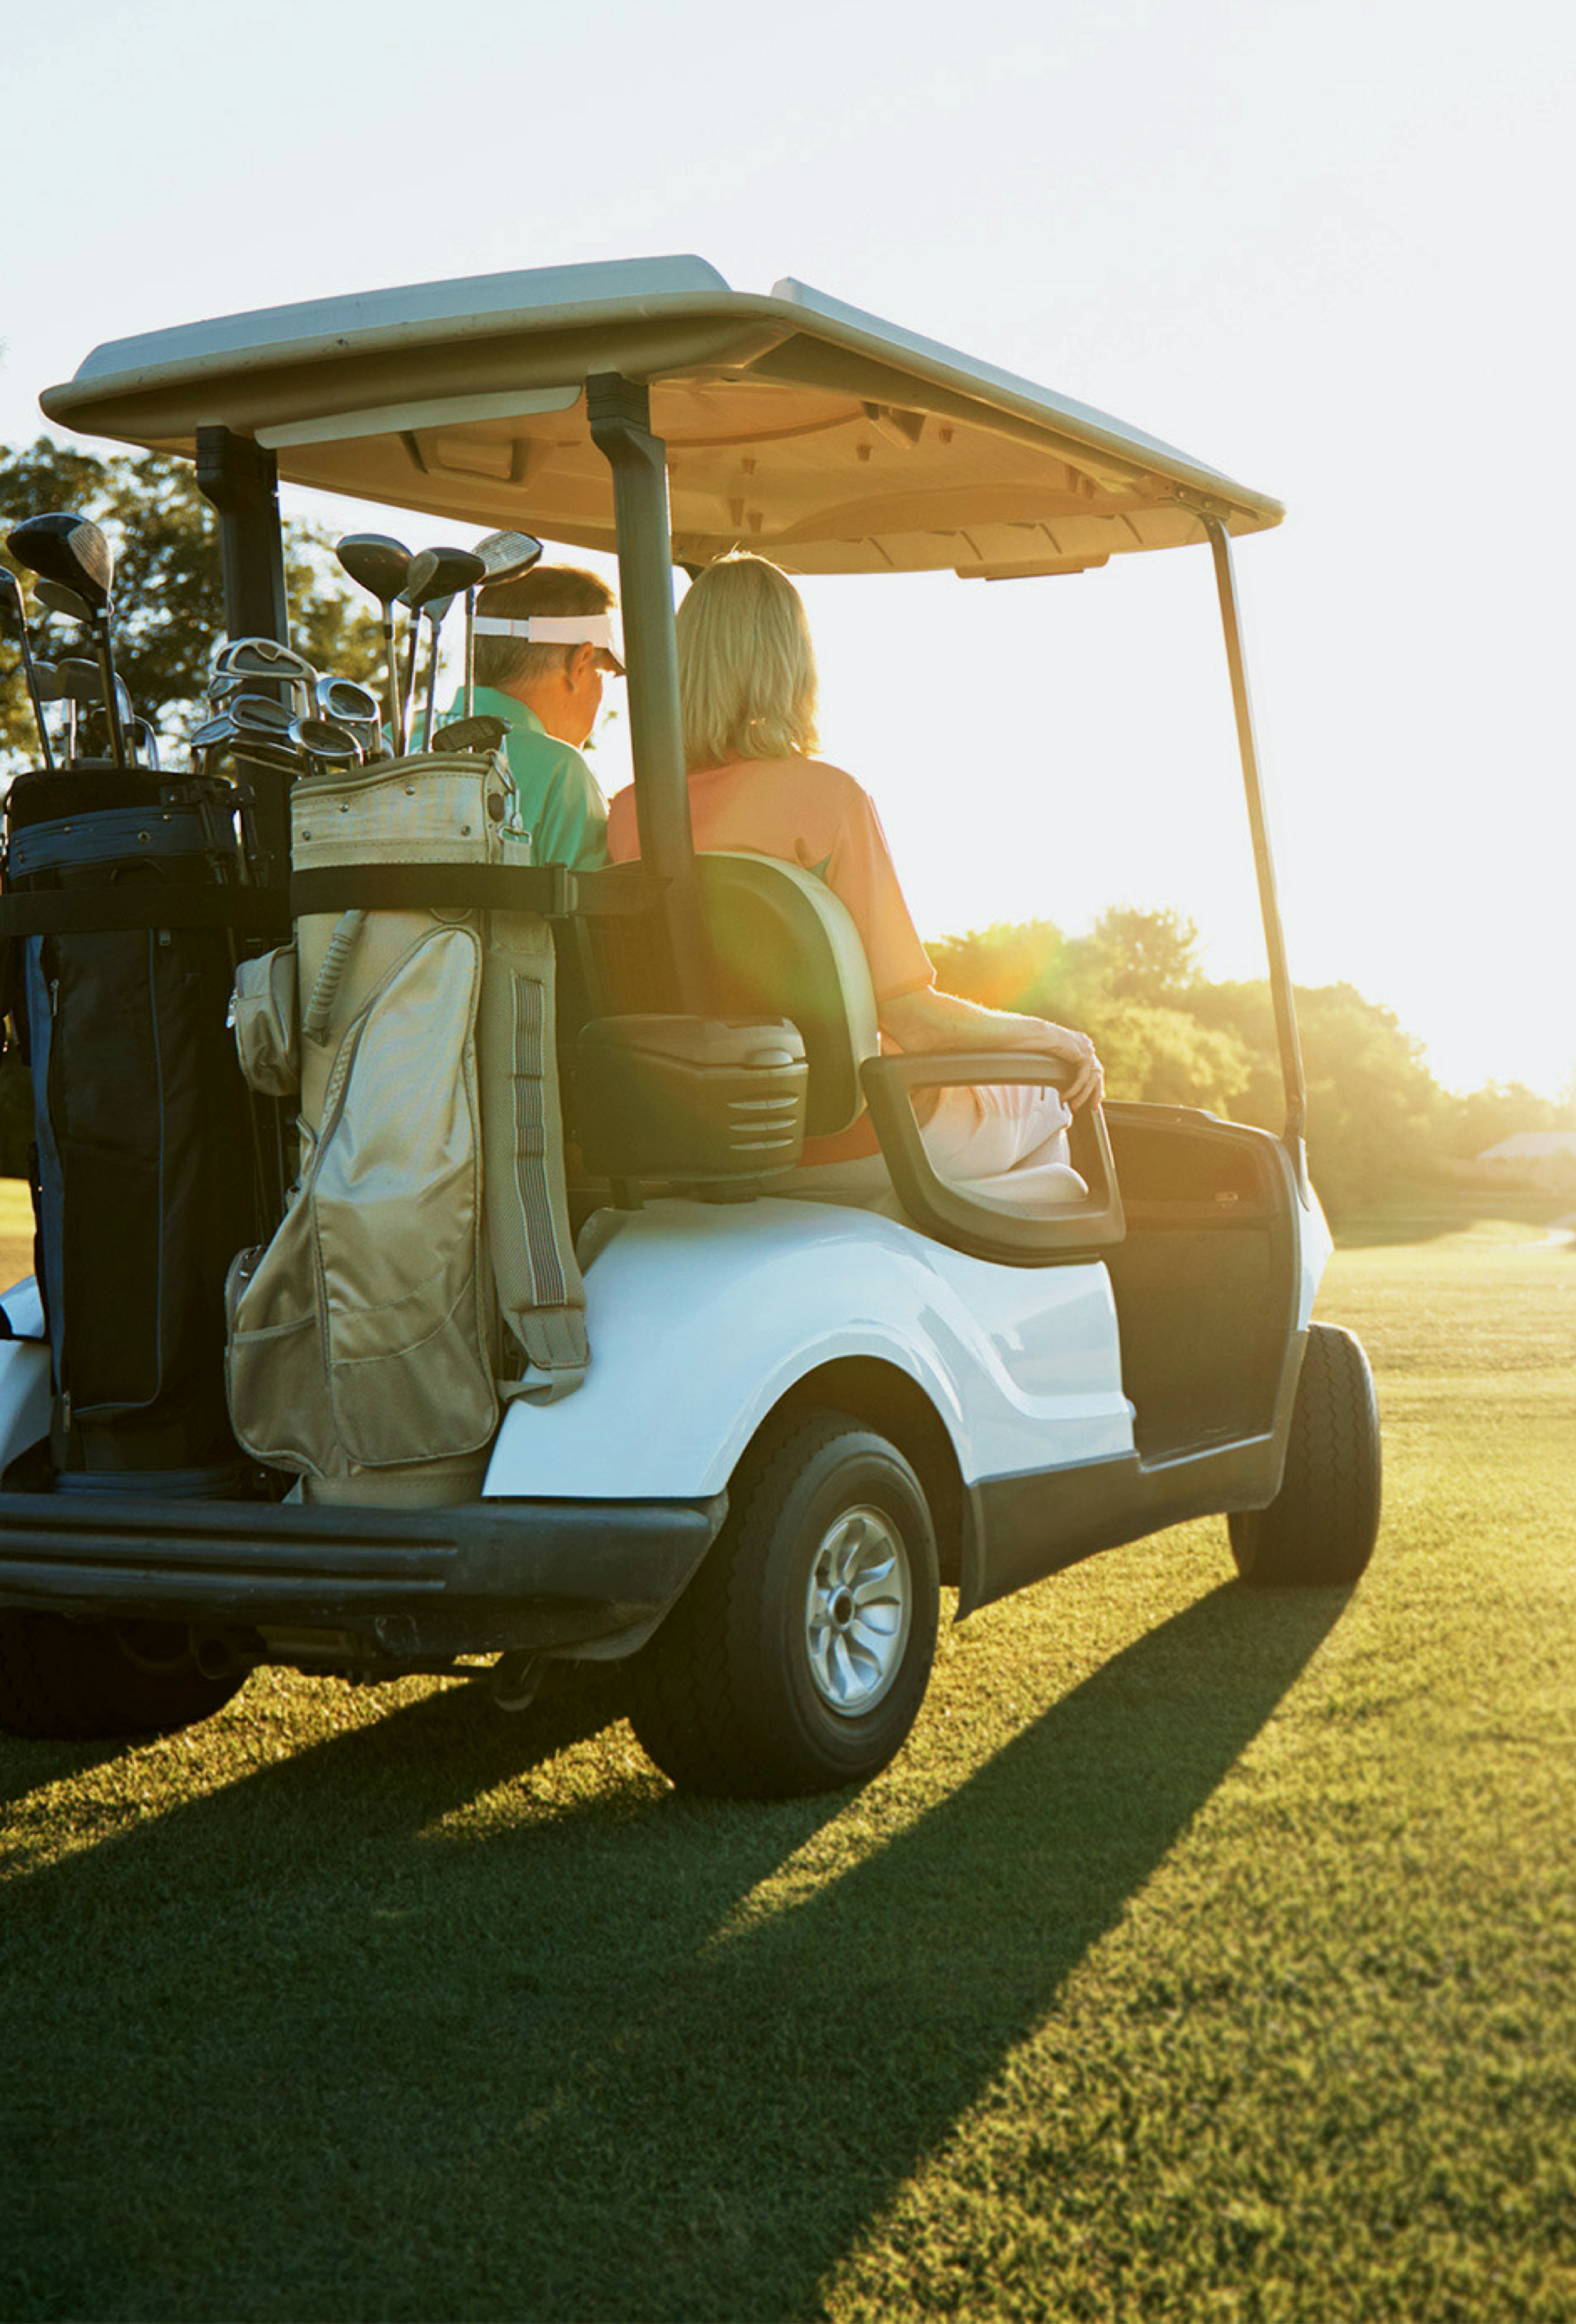 Picture of man and woman driving a golf cart through sunset field